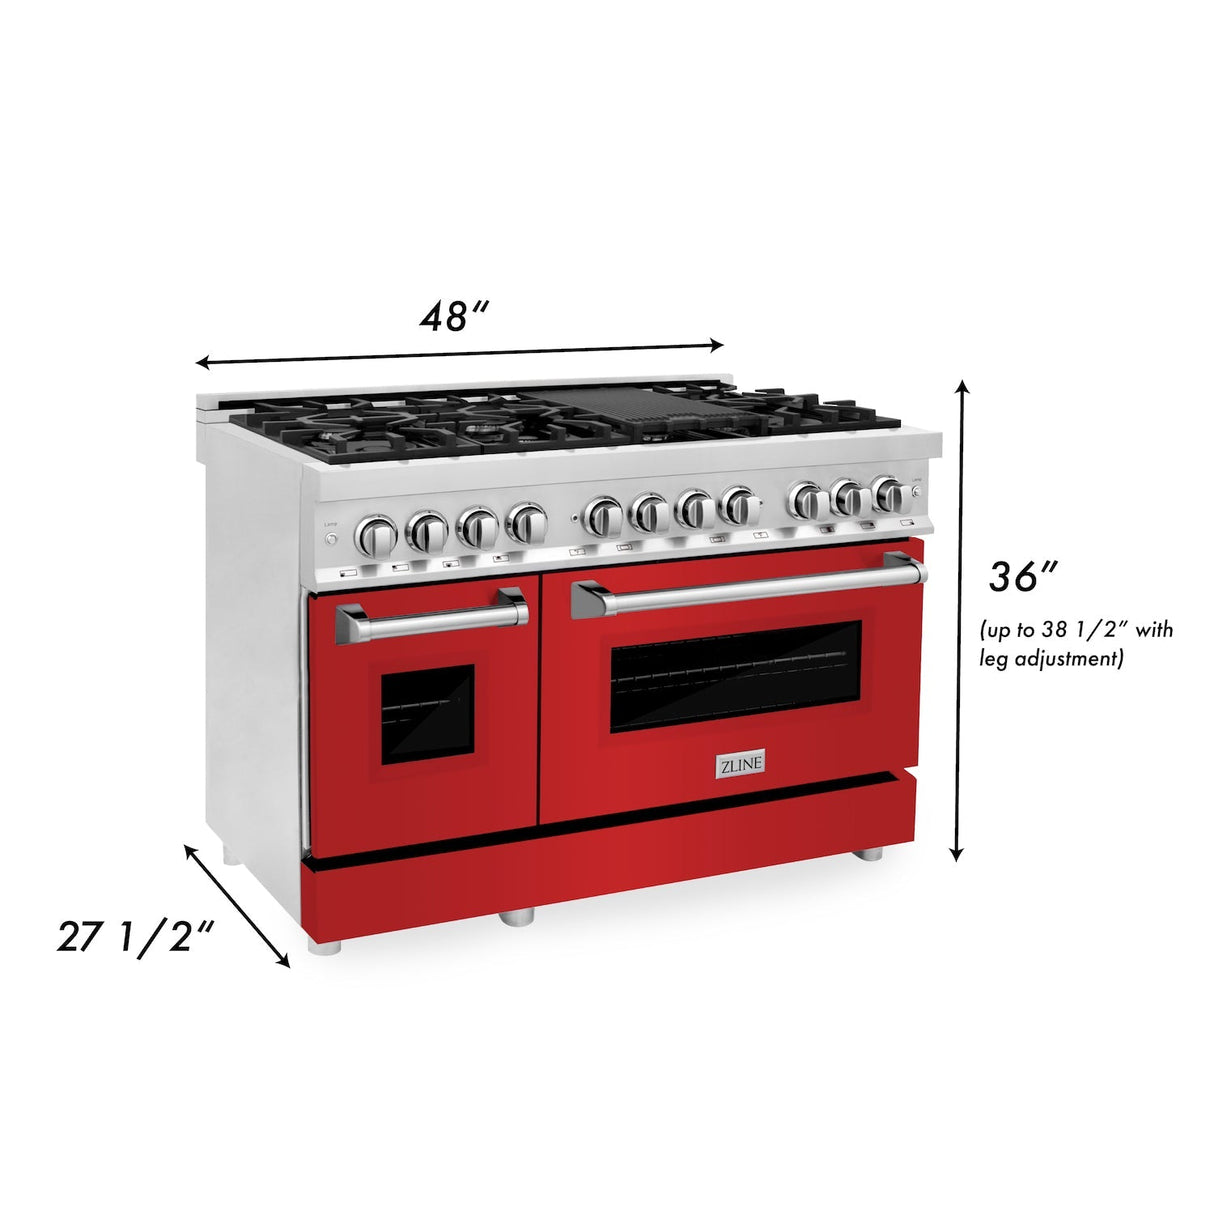 ZLINE 48 in. Professional Dual Fuel Range in Stainless Steel with Red Matte Doors (RA-RM-48)